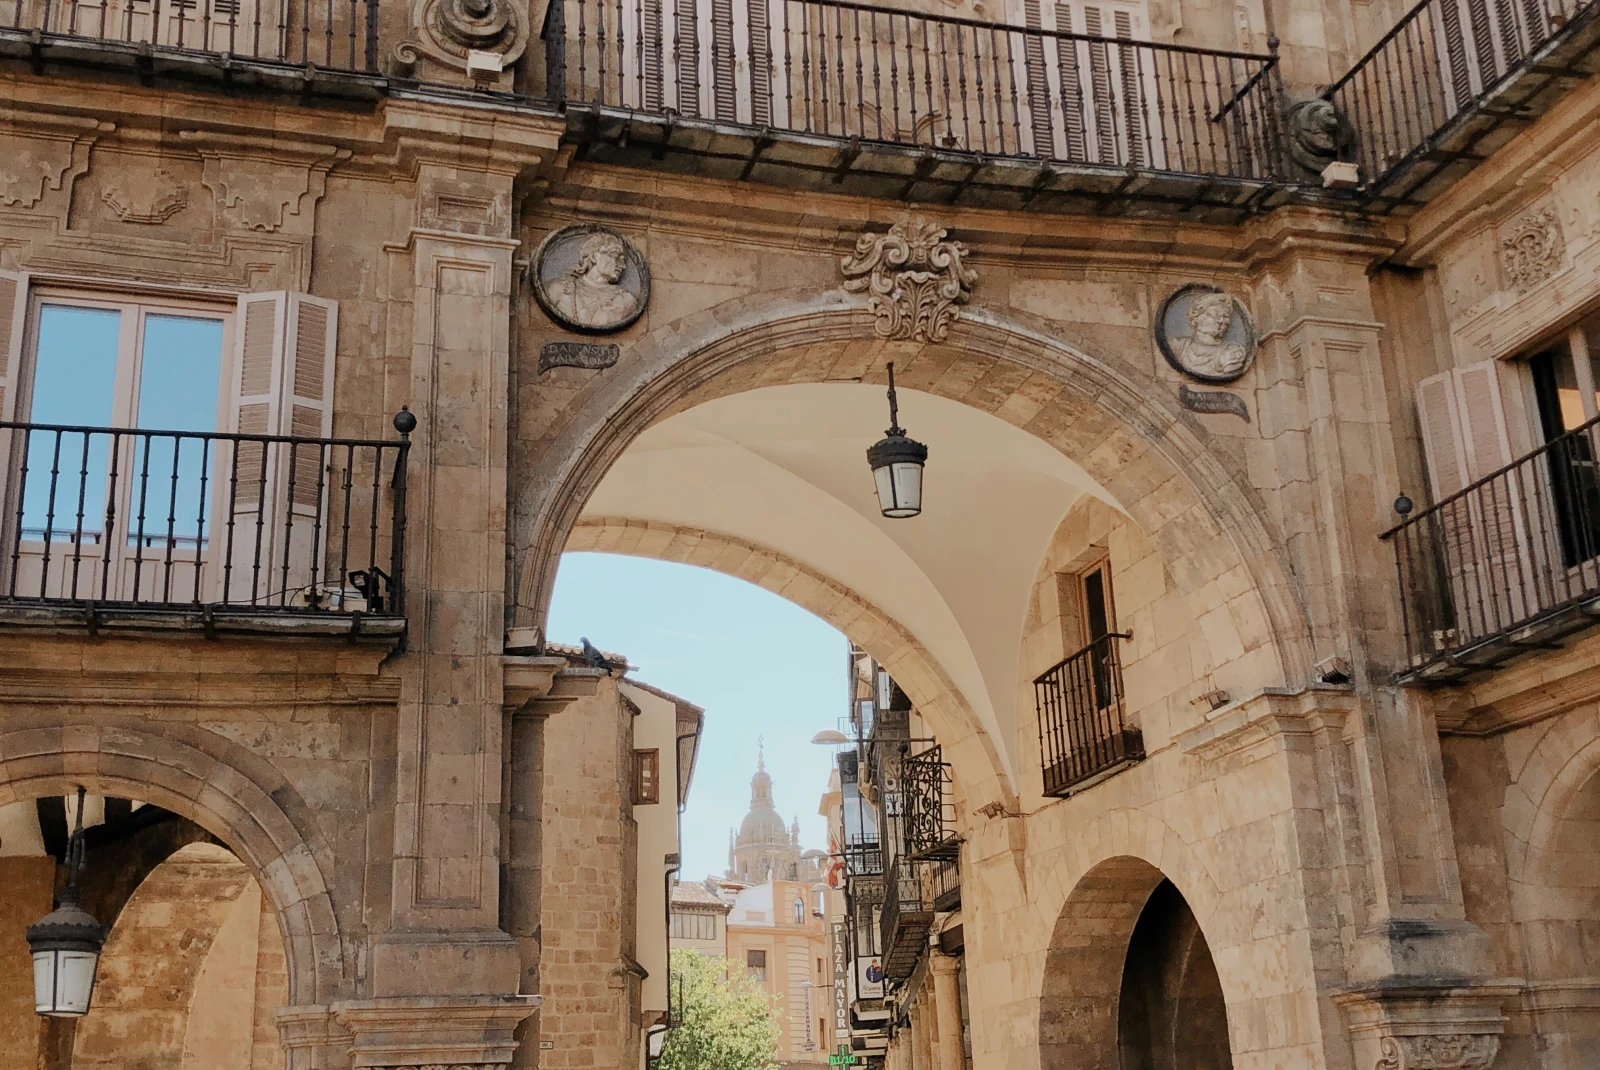 Arches of an old building in Salamanca, Spain.